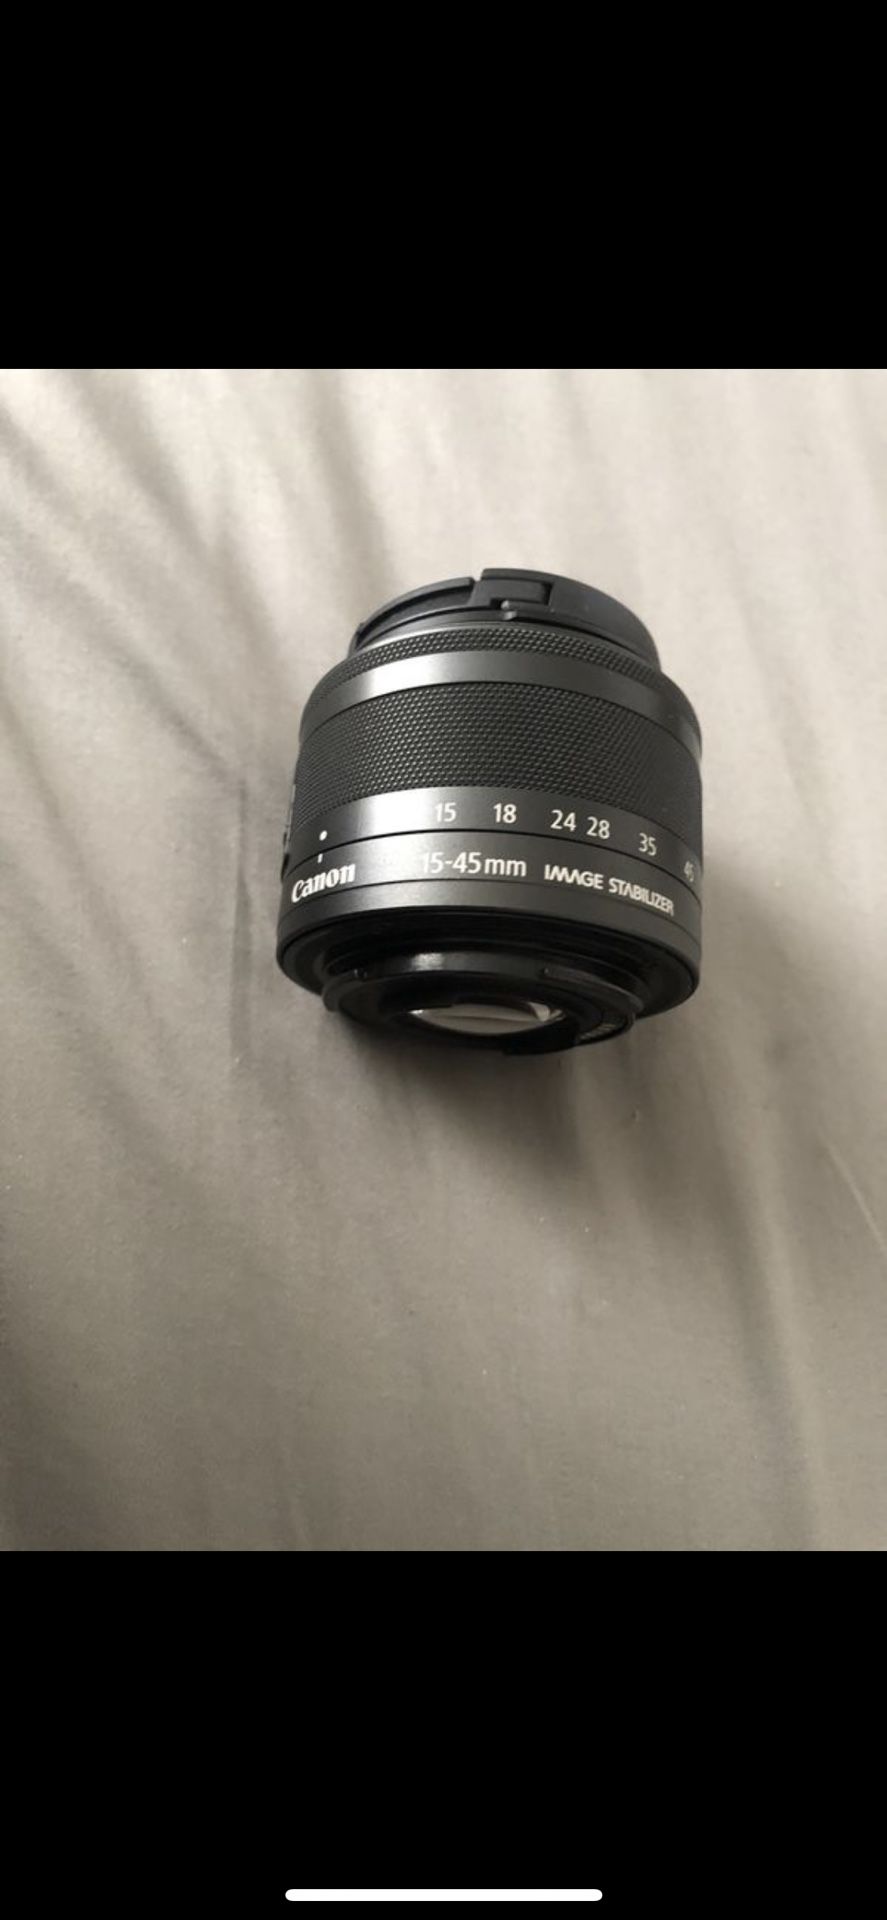 Brand New Canon Camera Zoom Lens EF-M 15-45mm